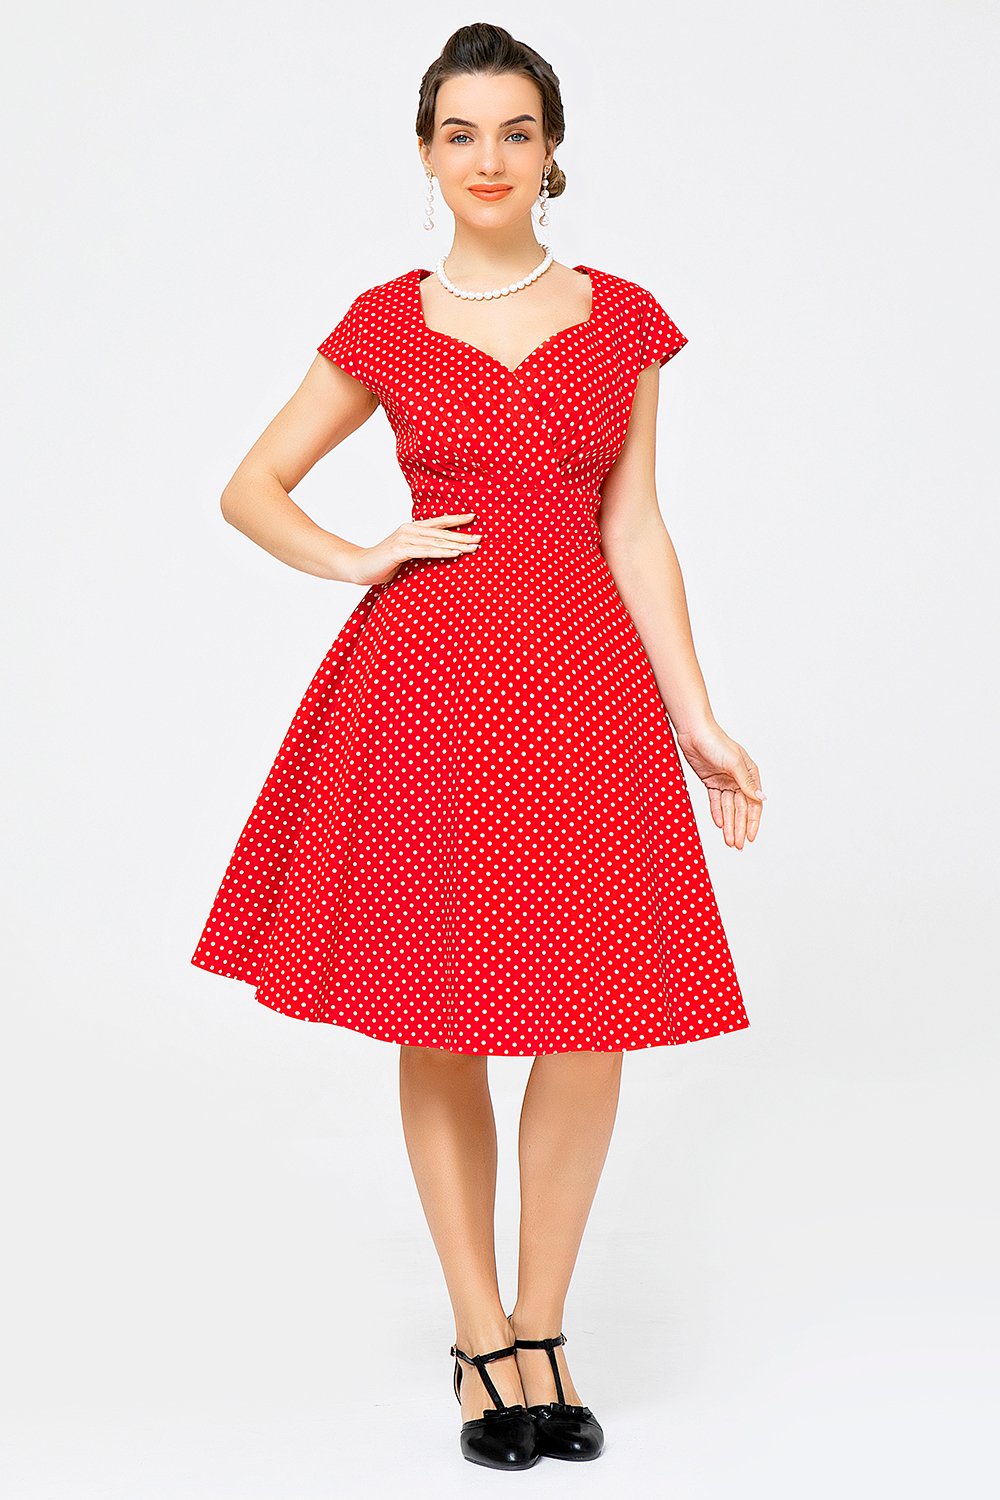 Red Small Polka Dots 1950s Swing Dress